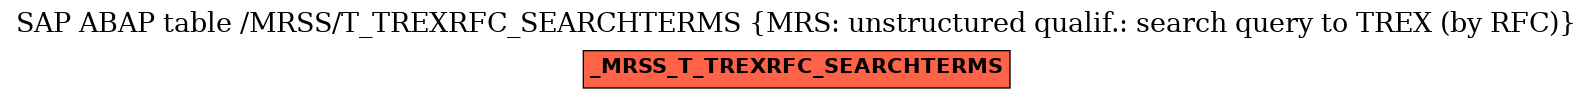 E-R Diagram for table /MRSS/T_TREXRFC_SEARCHTERMS (MRS: unstructured qualif.: search query to TREX (by RFC))